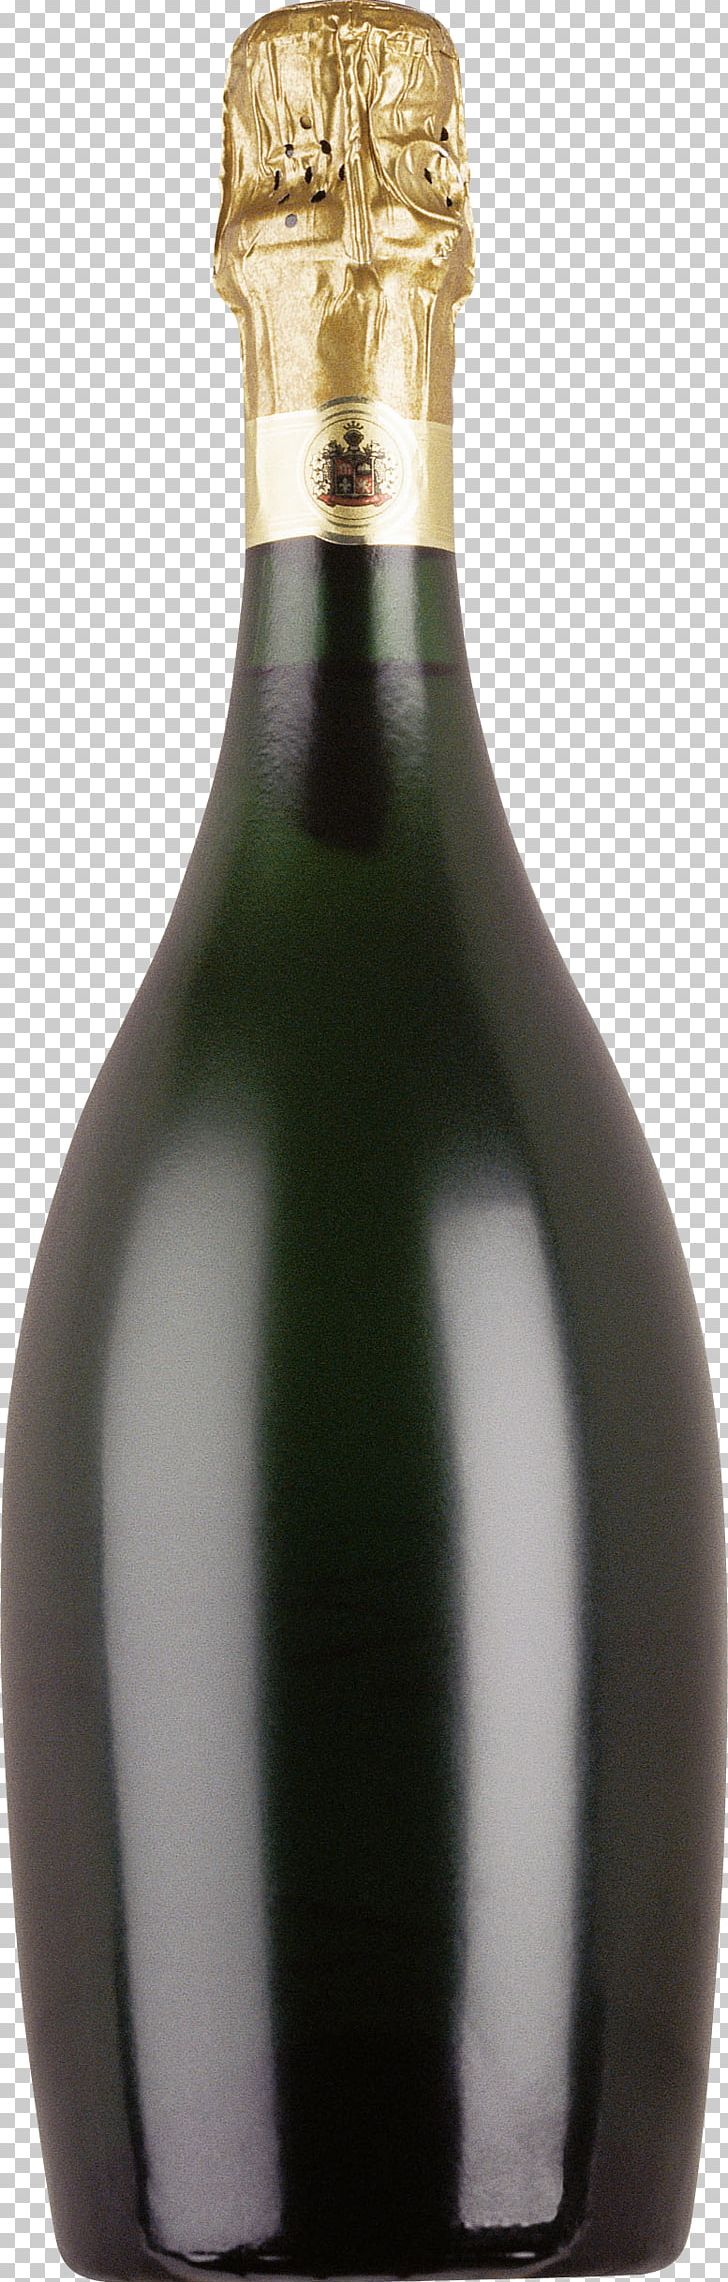 Champagne Bottle PNG, Clipart, Alcoholic Beverage, Alcoholic Drink, Bottle, Champagne, Champagne Bottle Free PNG Download